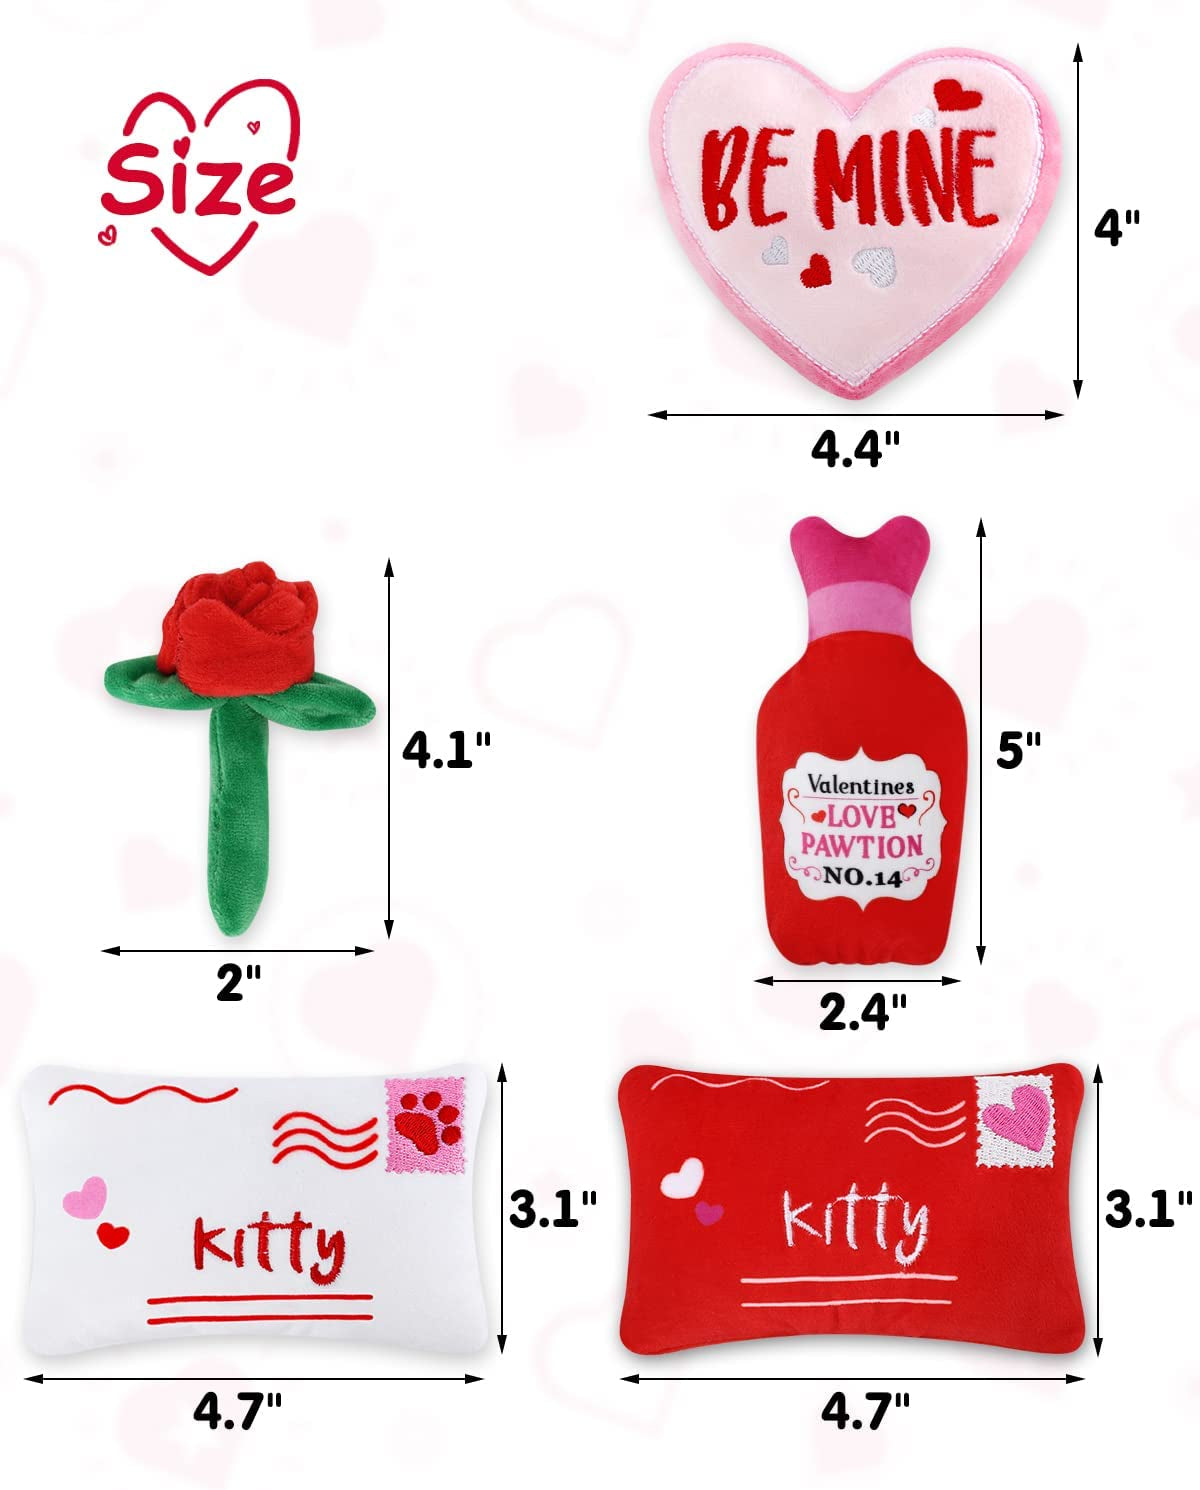 Valentine's Day Catnip Toy Set: 5 Soft Plush Toys with Love Letters, Hearts, and Roses – Interactive and Catnip Filled for Kitty Delight, Perfect Gift for Cat Lovers